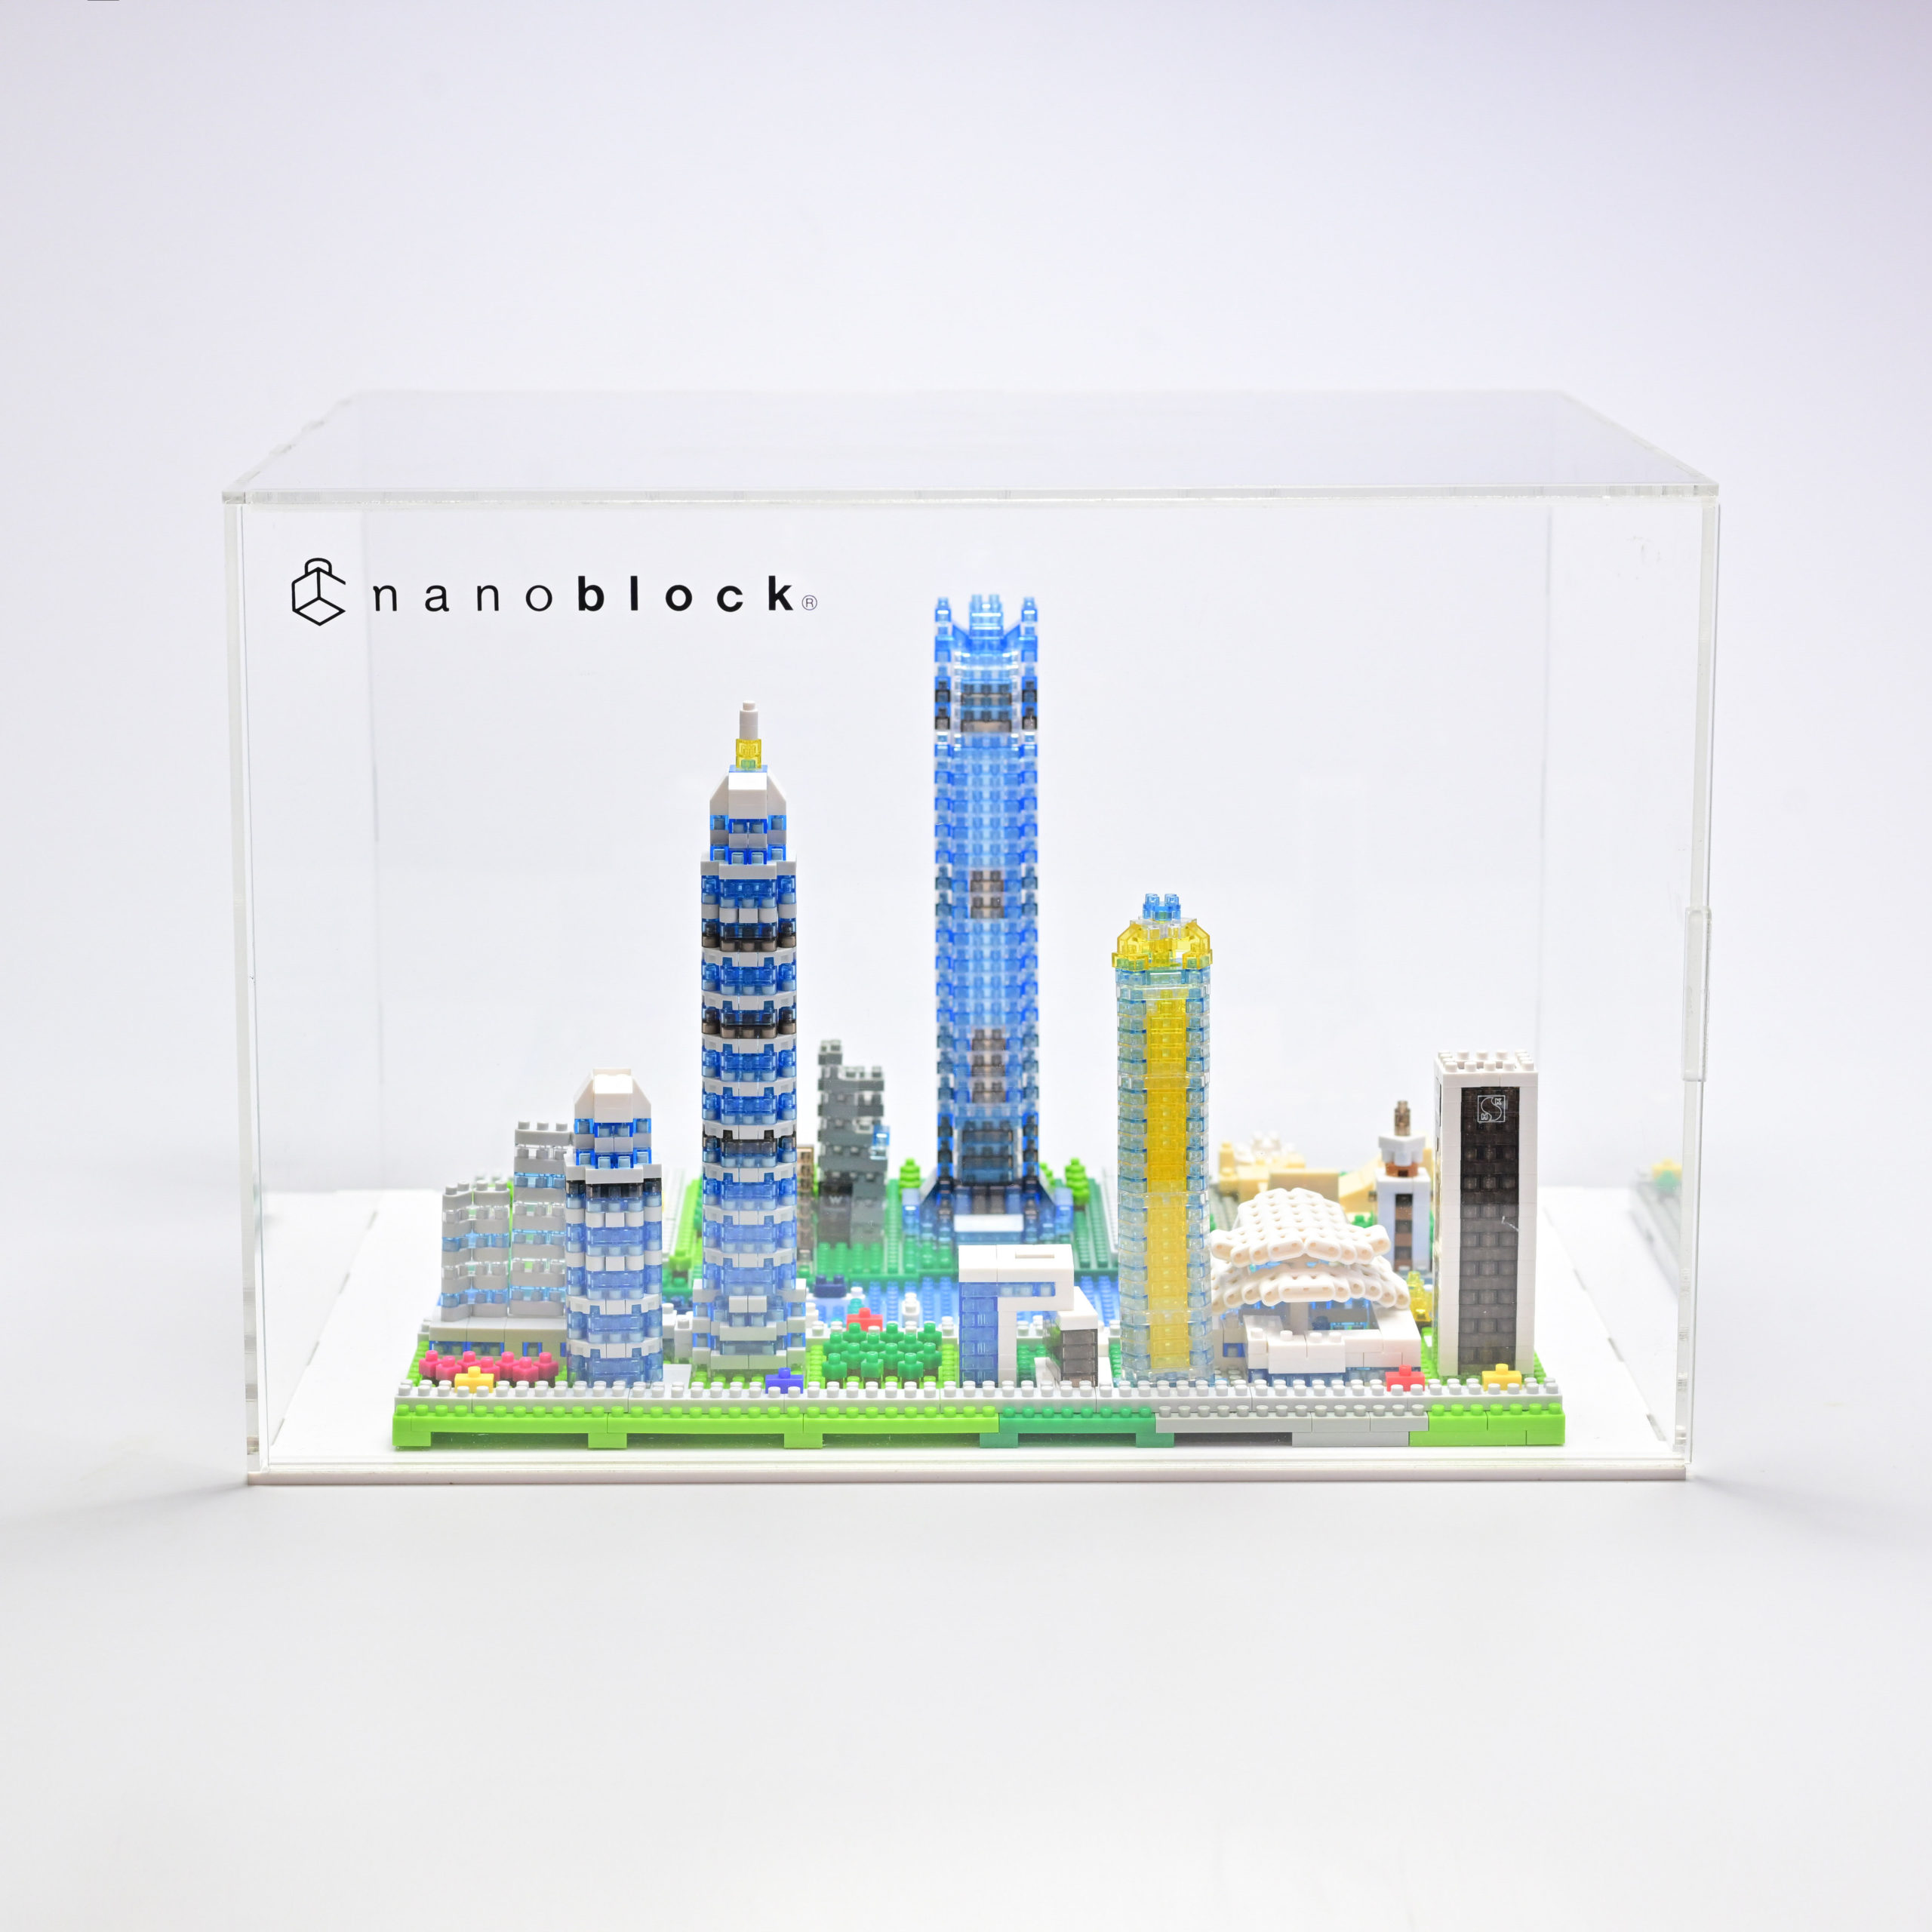 sky100 joins hand with Japan's nanoblock to design the world's